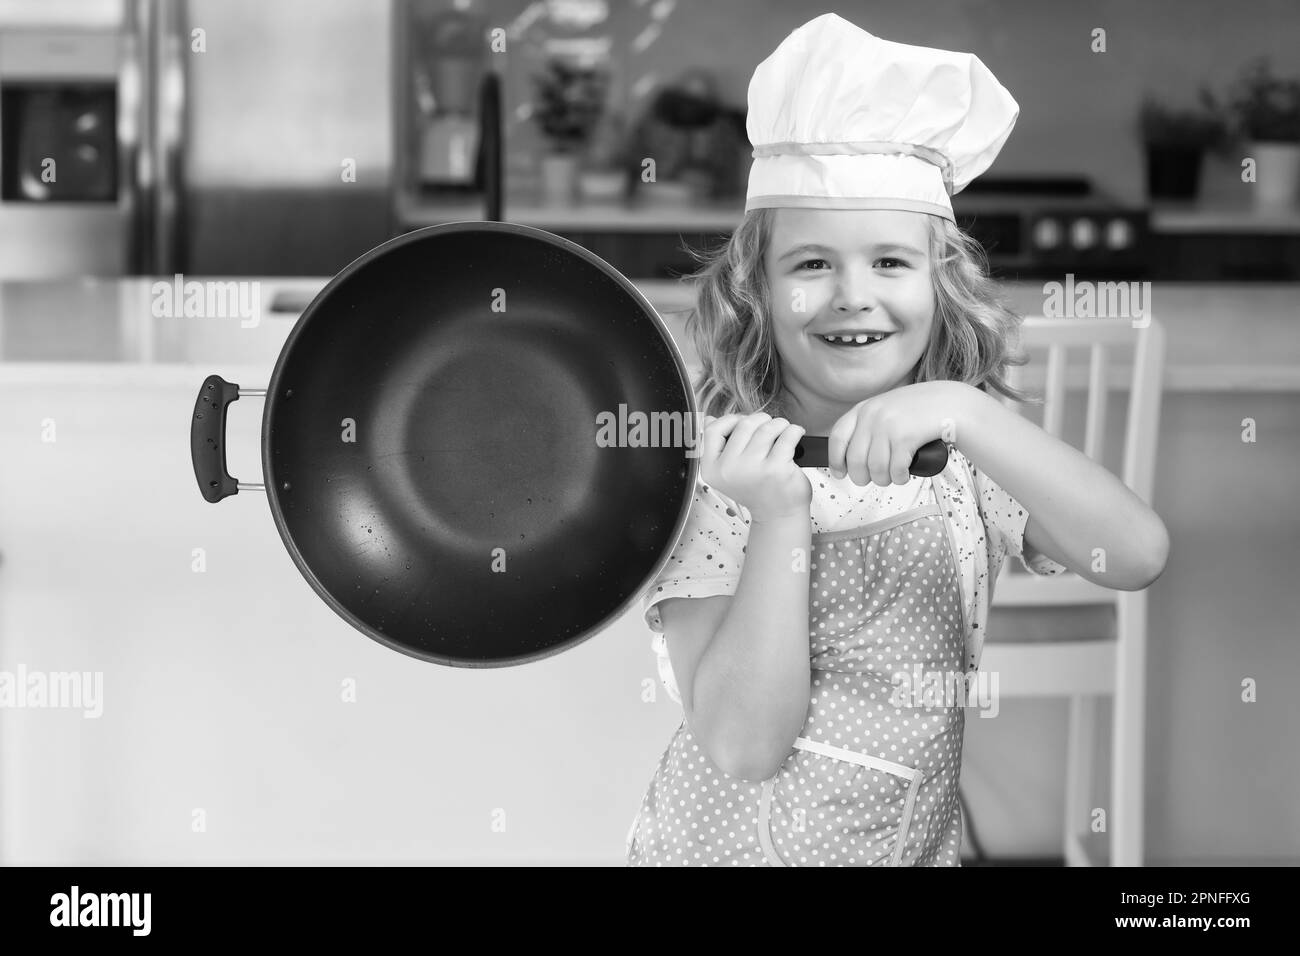 https://c8.alamy.com/comp/2PNFFXG/kid-chef-cook-cookery-with-pan-in-kitchen-chef-kid-cook-baking-at-home-kitchen-kid-chef-cook-cookery-at-kitchen-cooking-culinary-and-kids-little-2PNFFXG.jpg